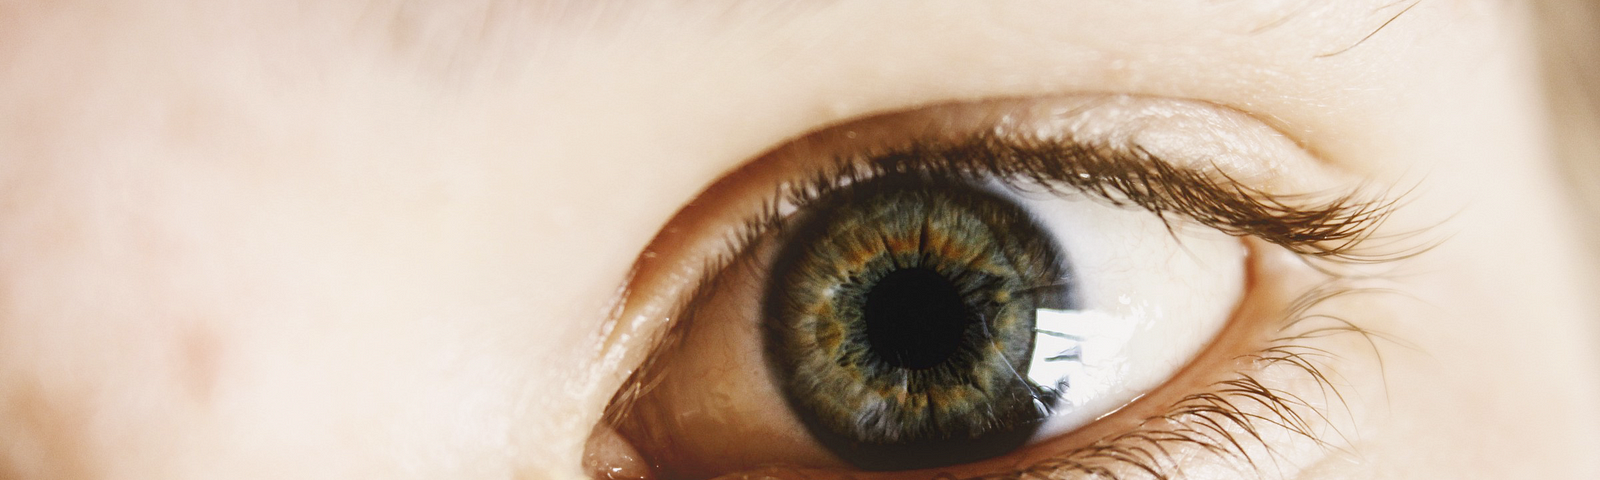 A close up picture of a person’s left eye.